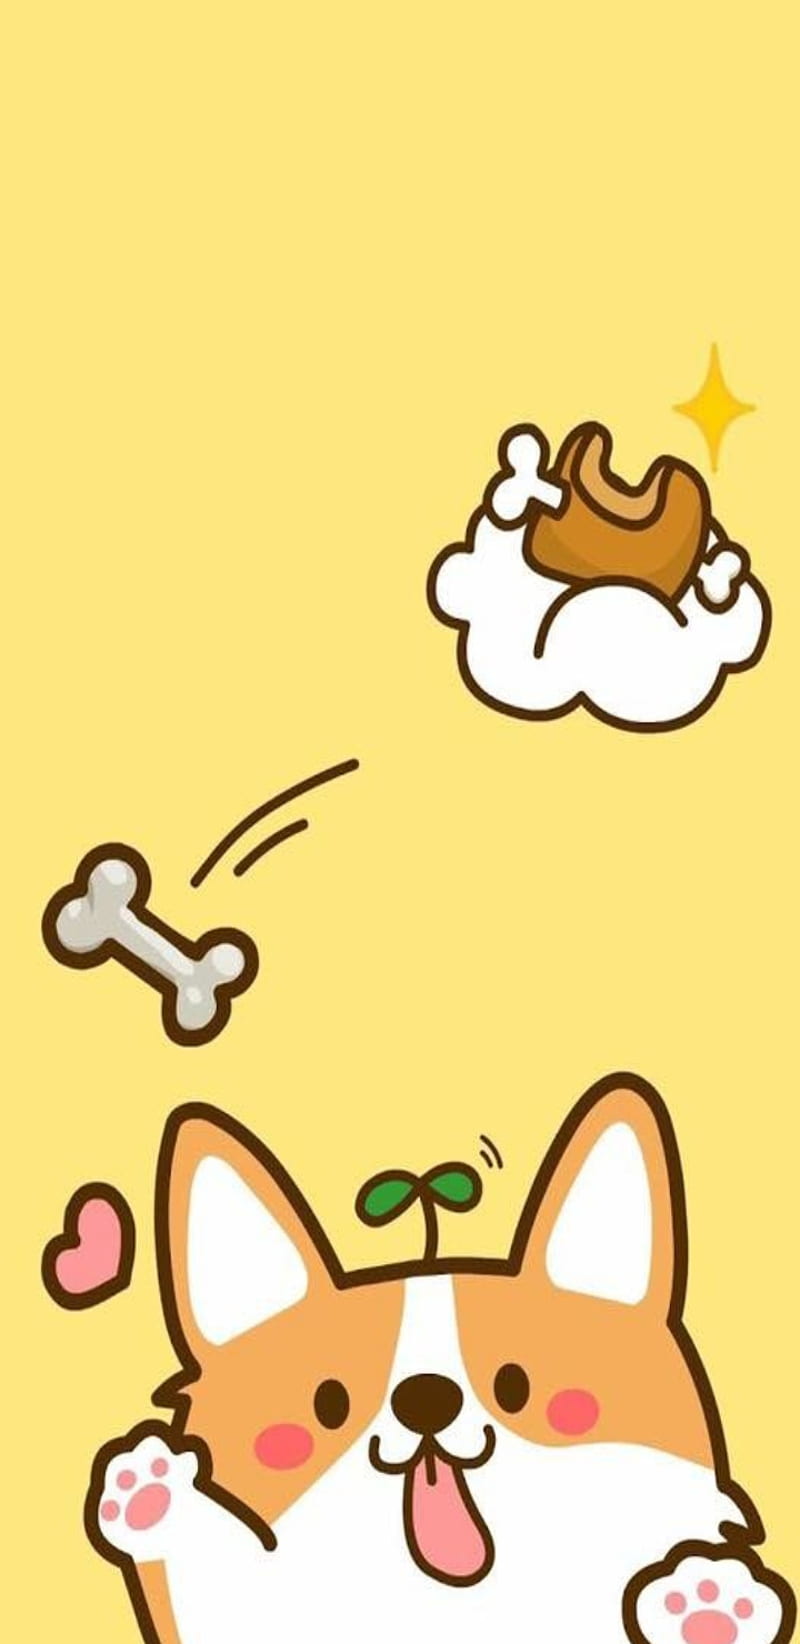 Cute Corgi Mobile Wallpaper Background Wallpaper Image For Free Download   Pngtree